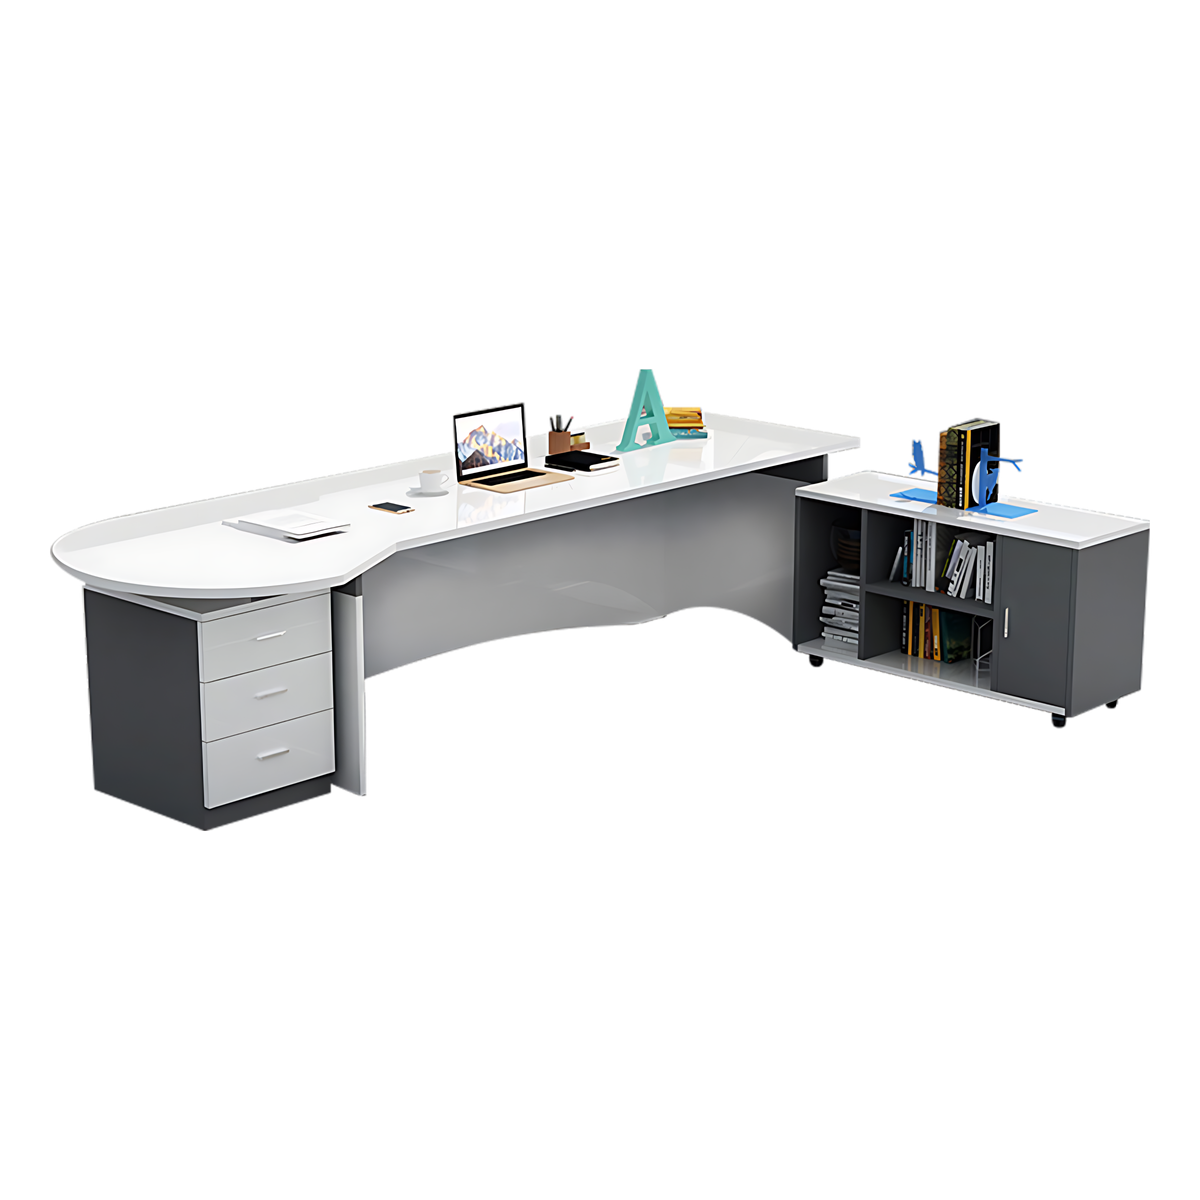 Executive desk with 3 Drawers and Rounded Corners Design